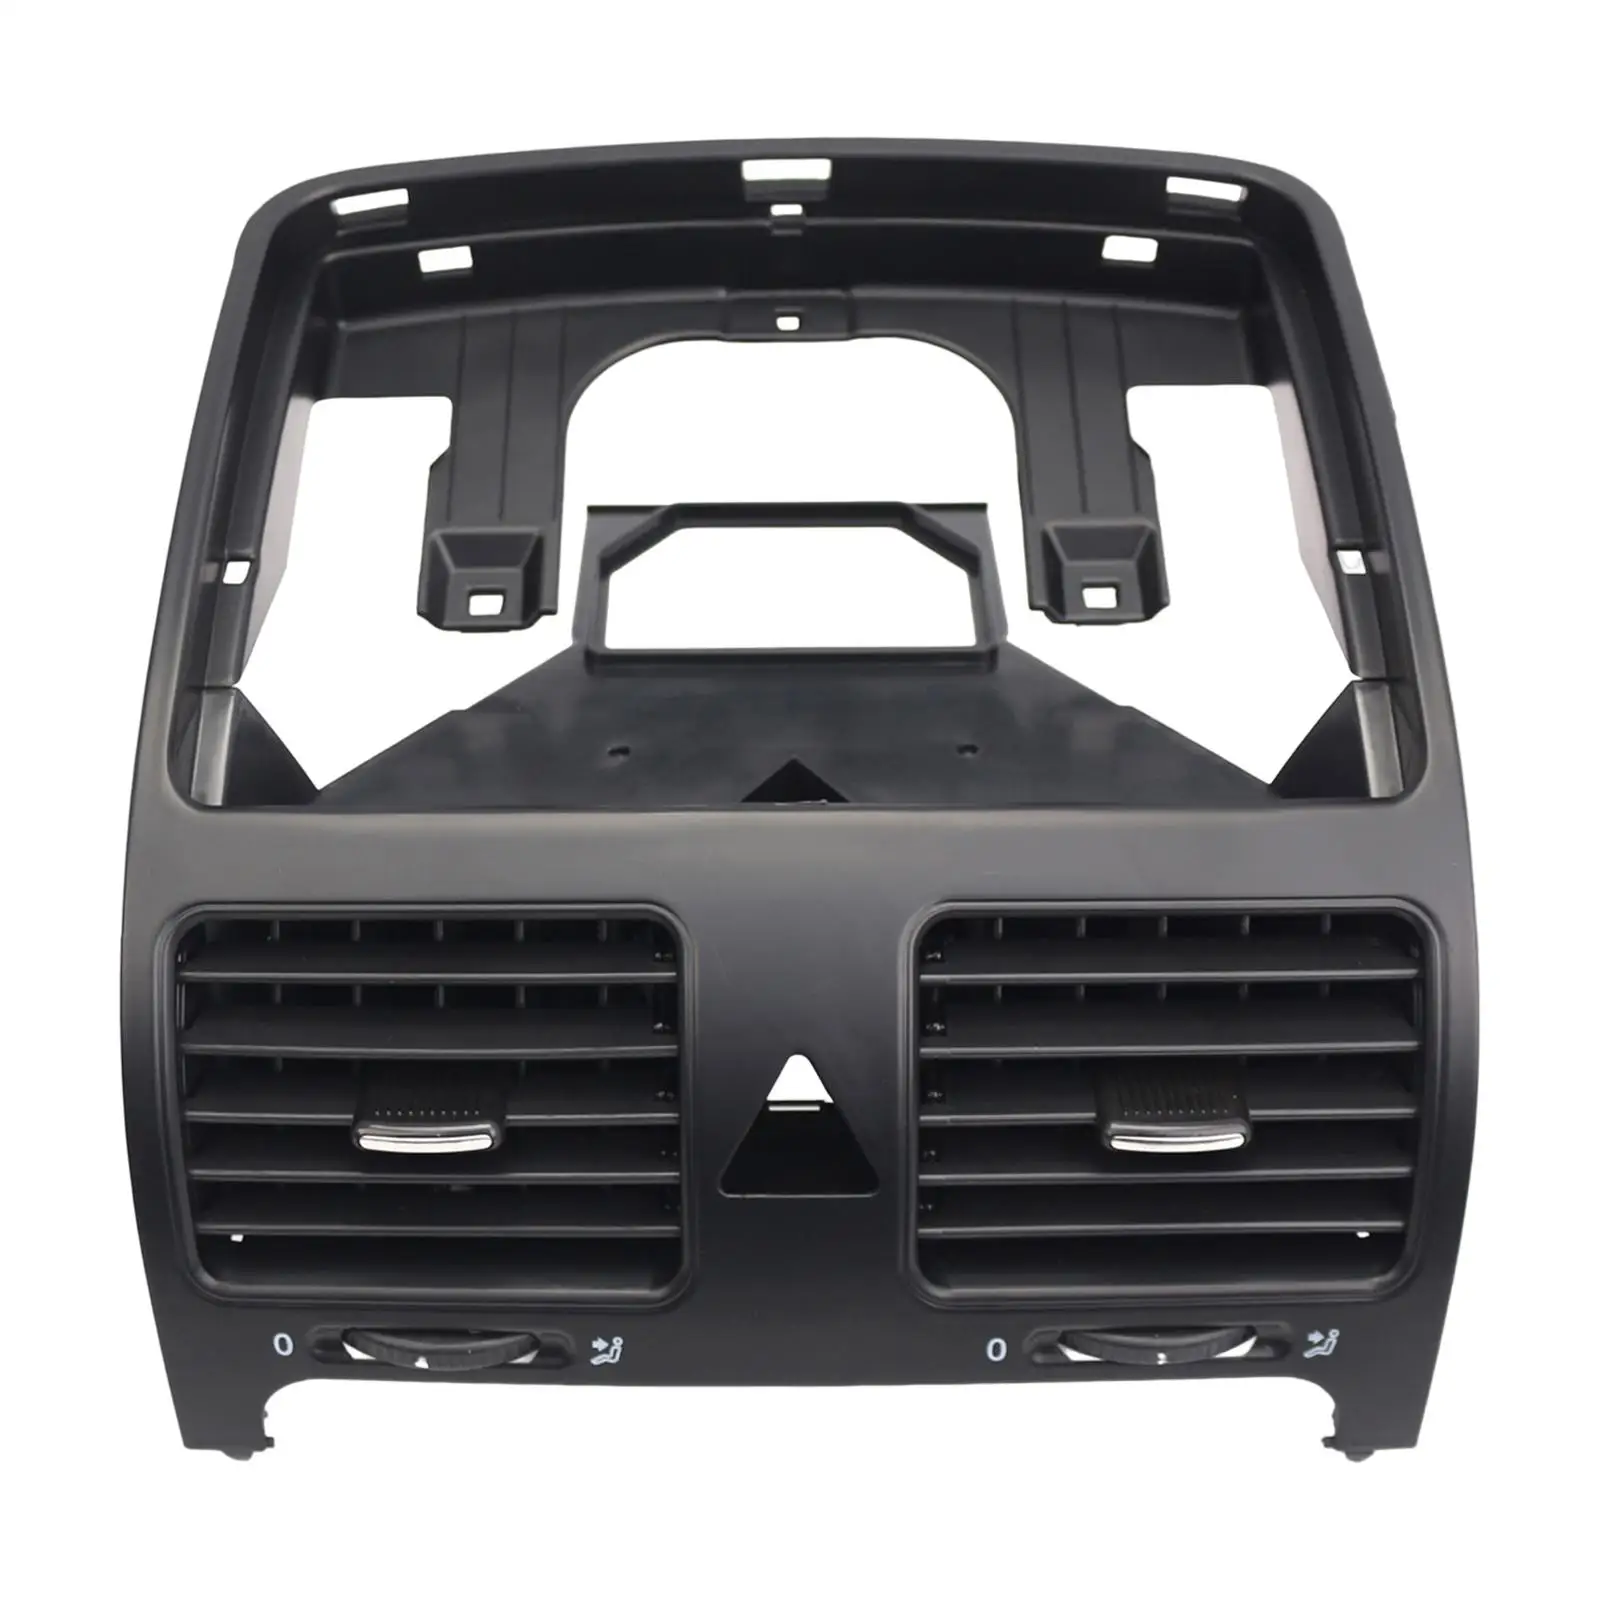 A/C Air Vent Outlet Grille Panel Center Dashboard for forVW Golf MK5 1K0819728H 1K0819743B 1K0 819 728 Car Replacement